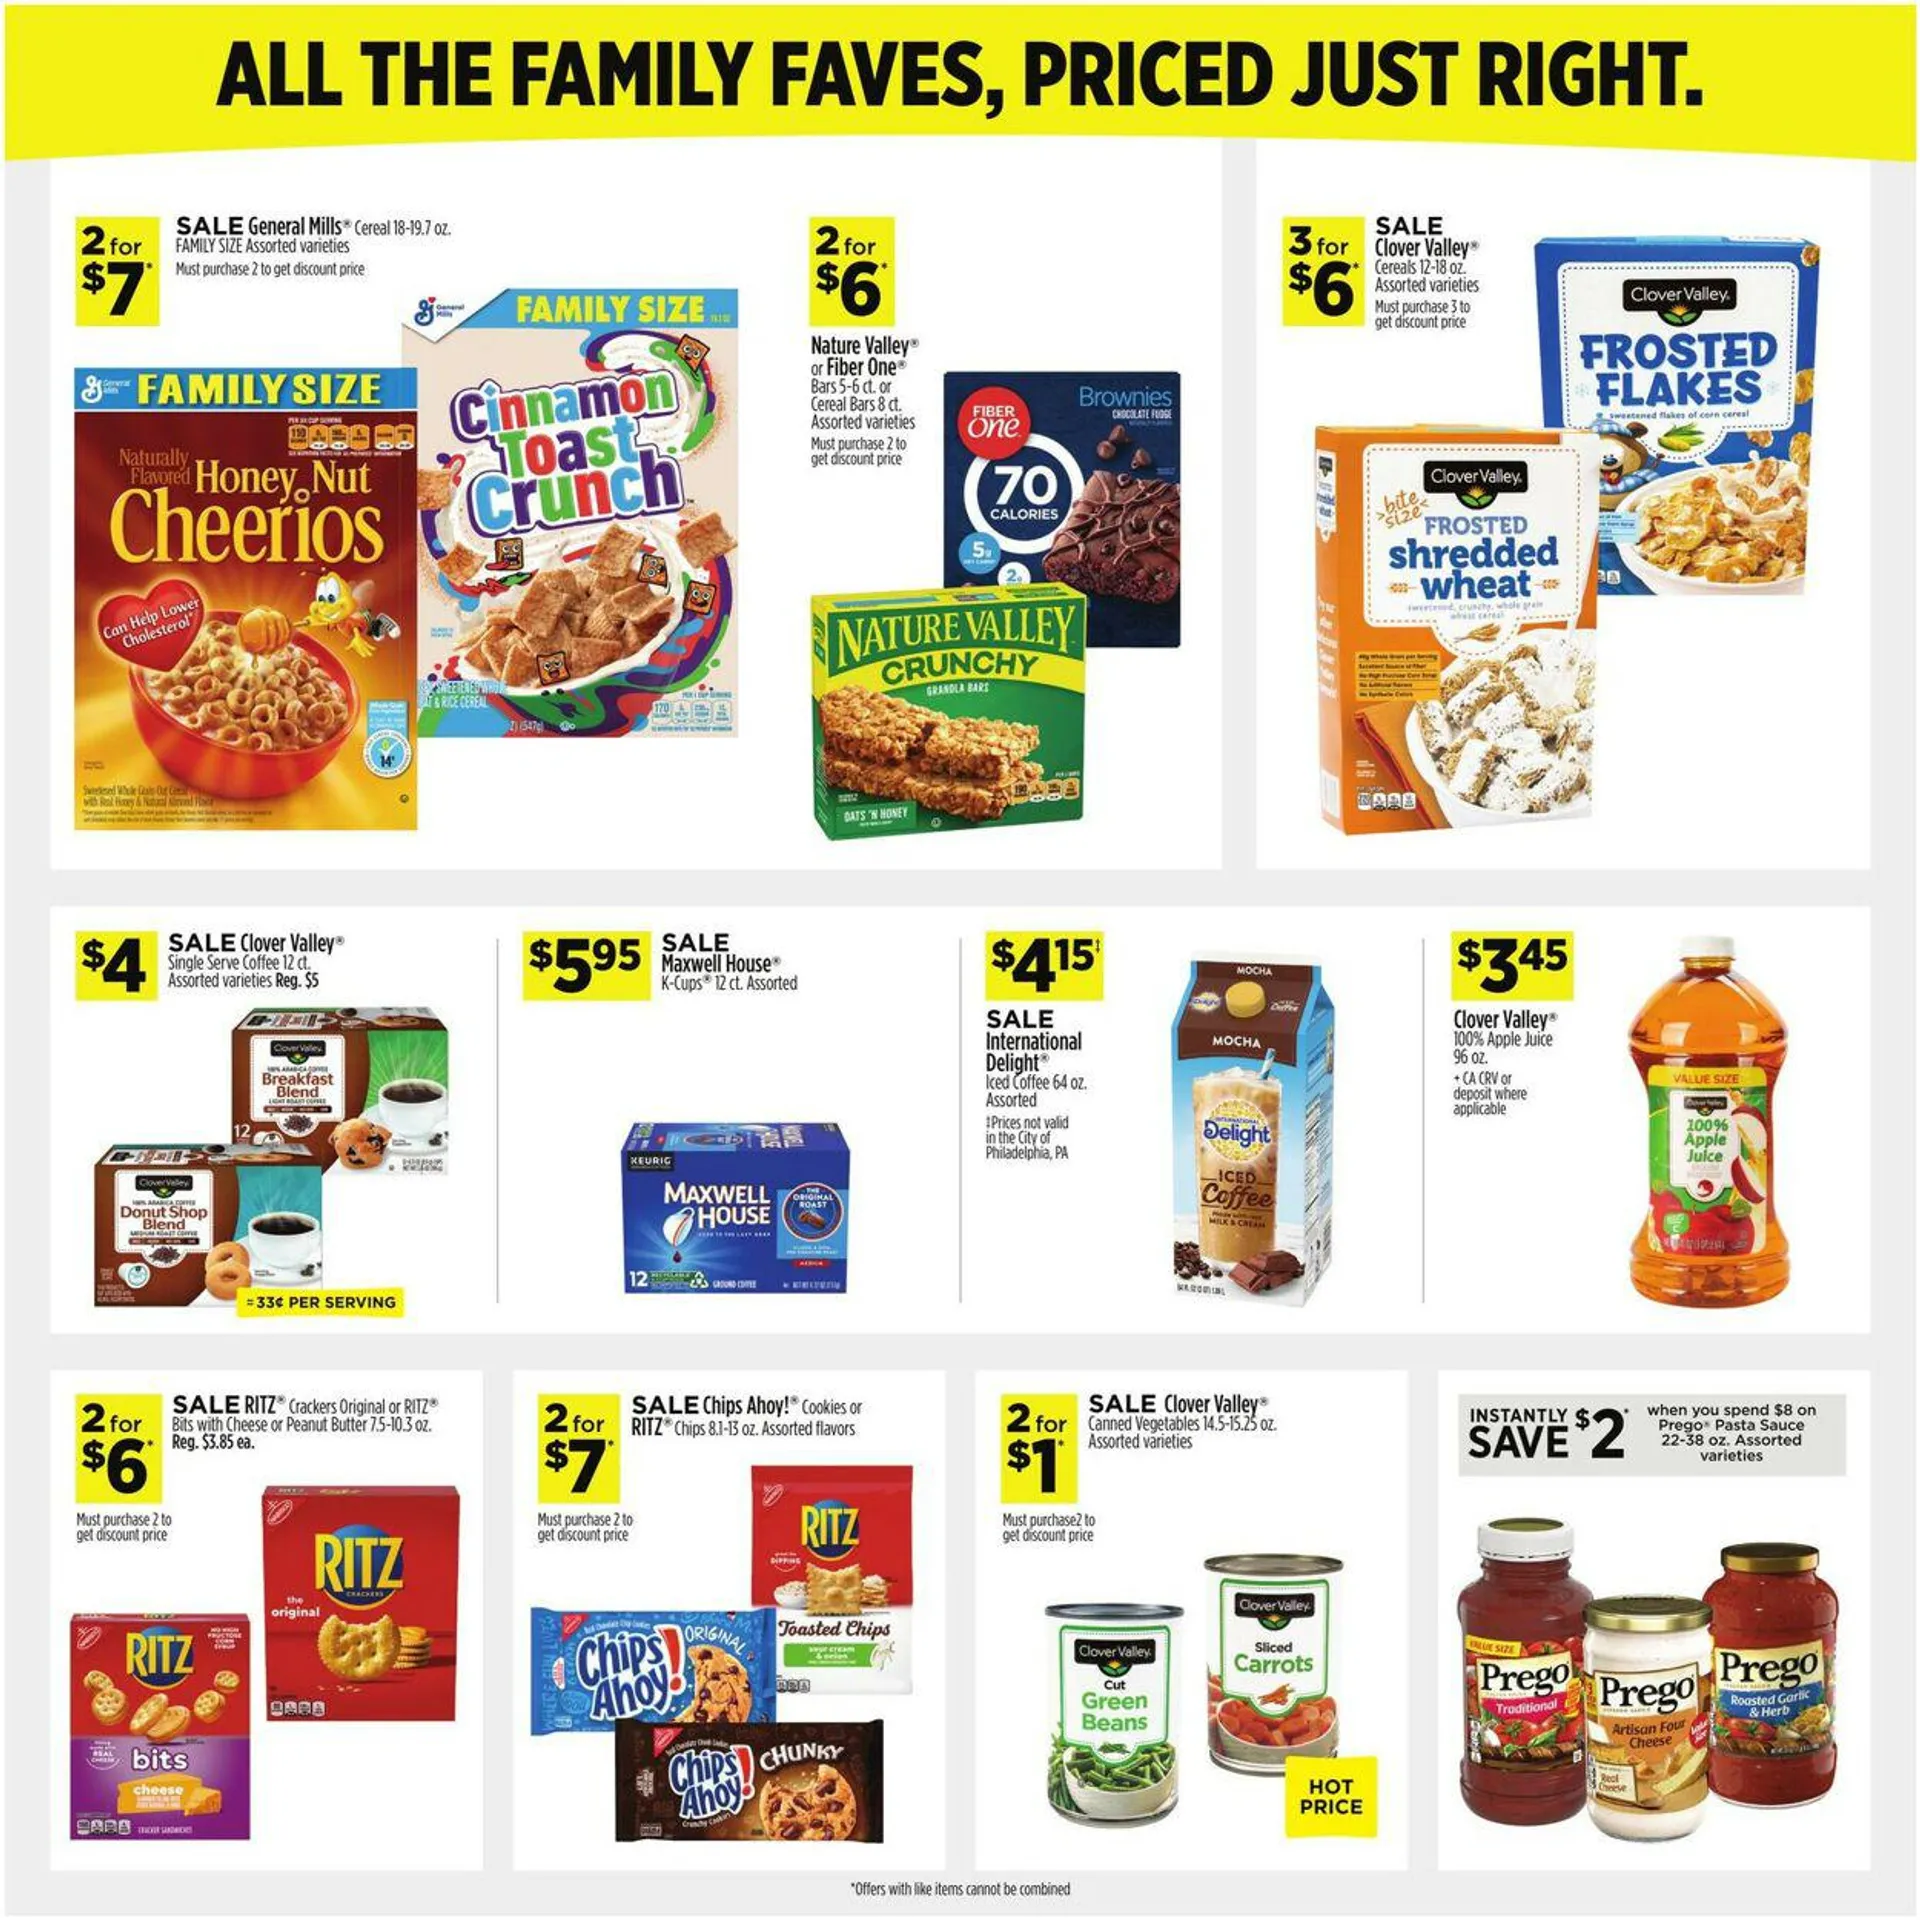 Dollar General Current weekly ad - 4